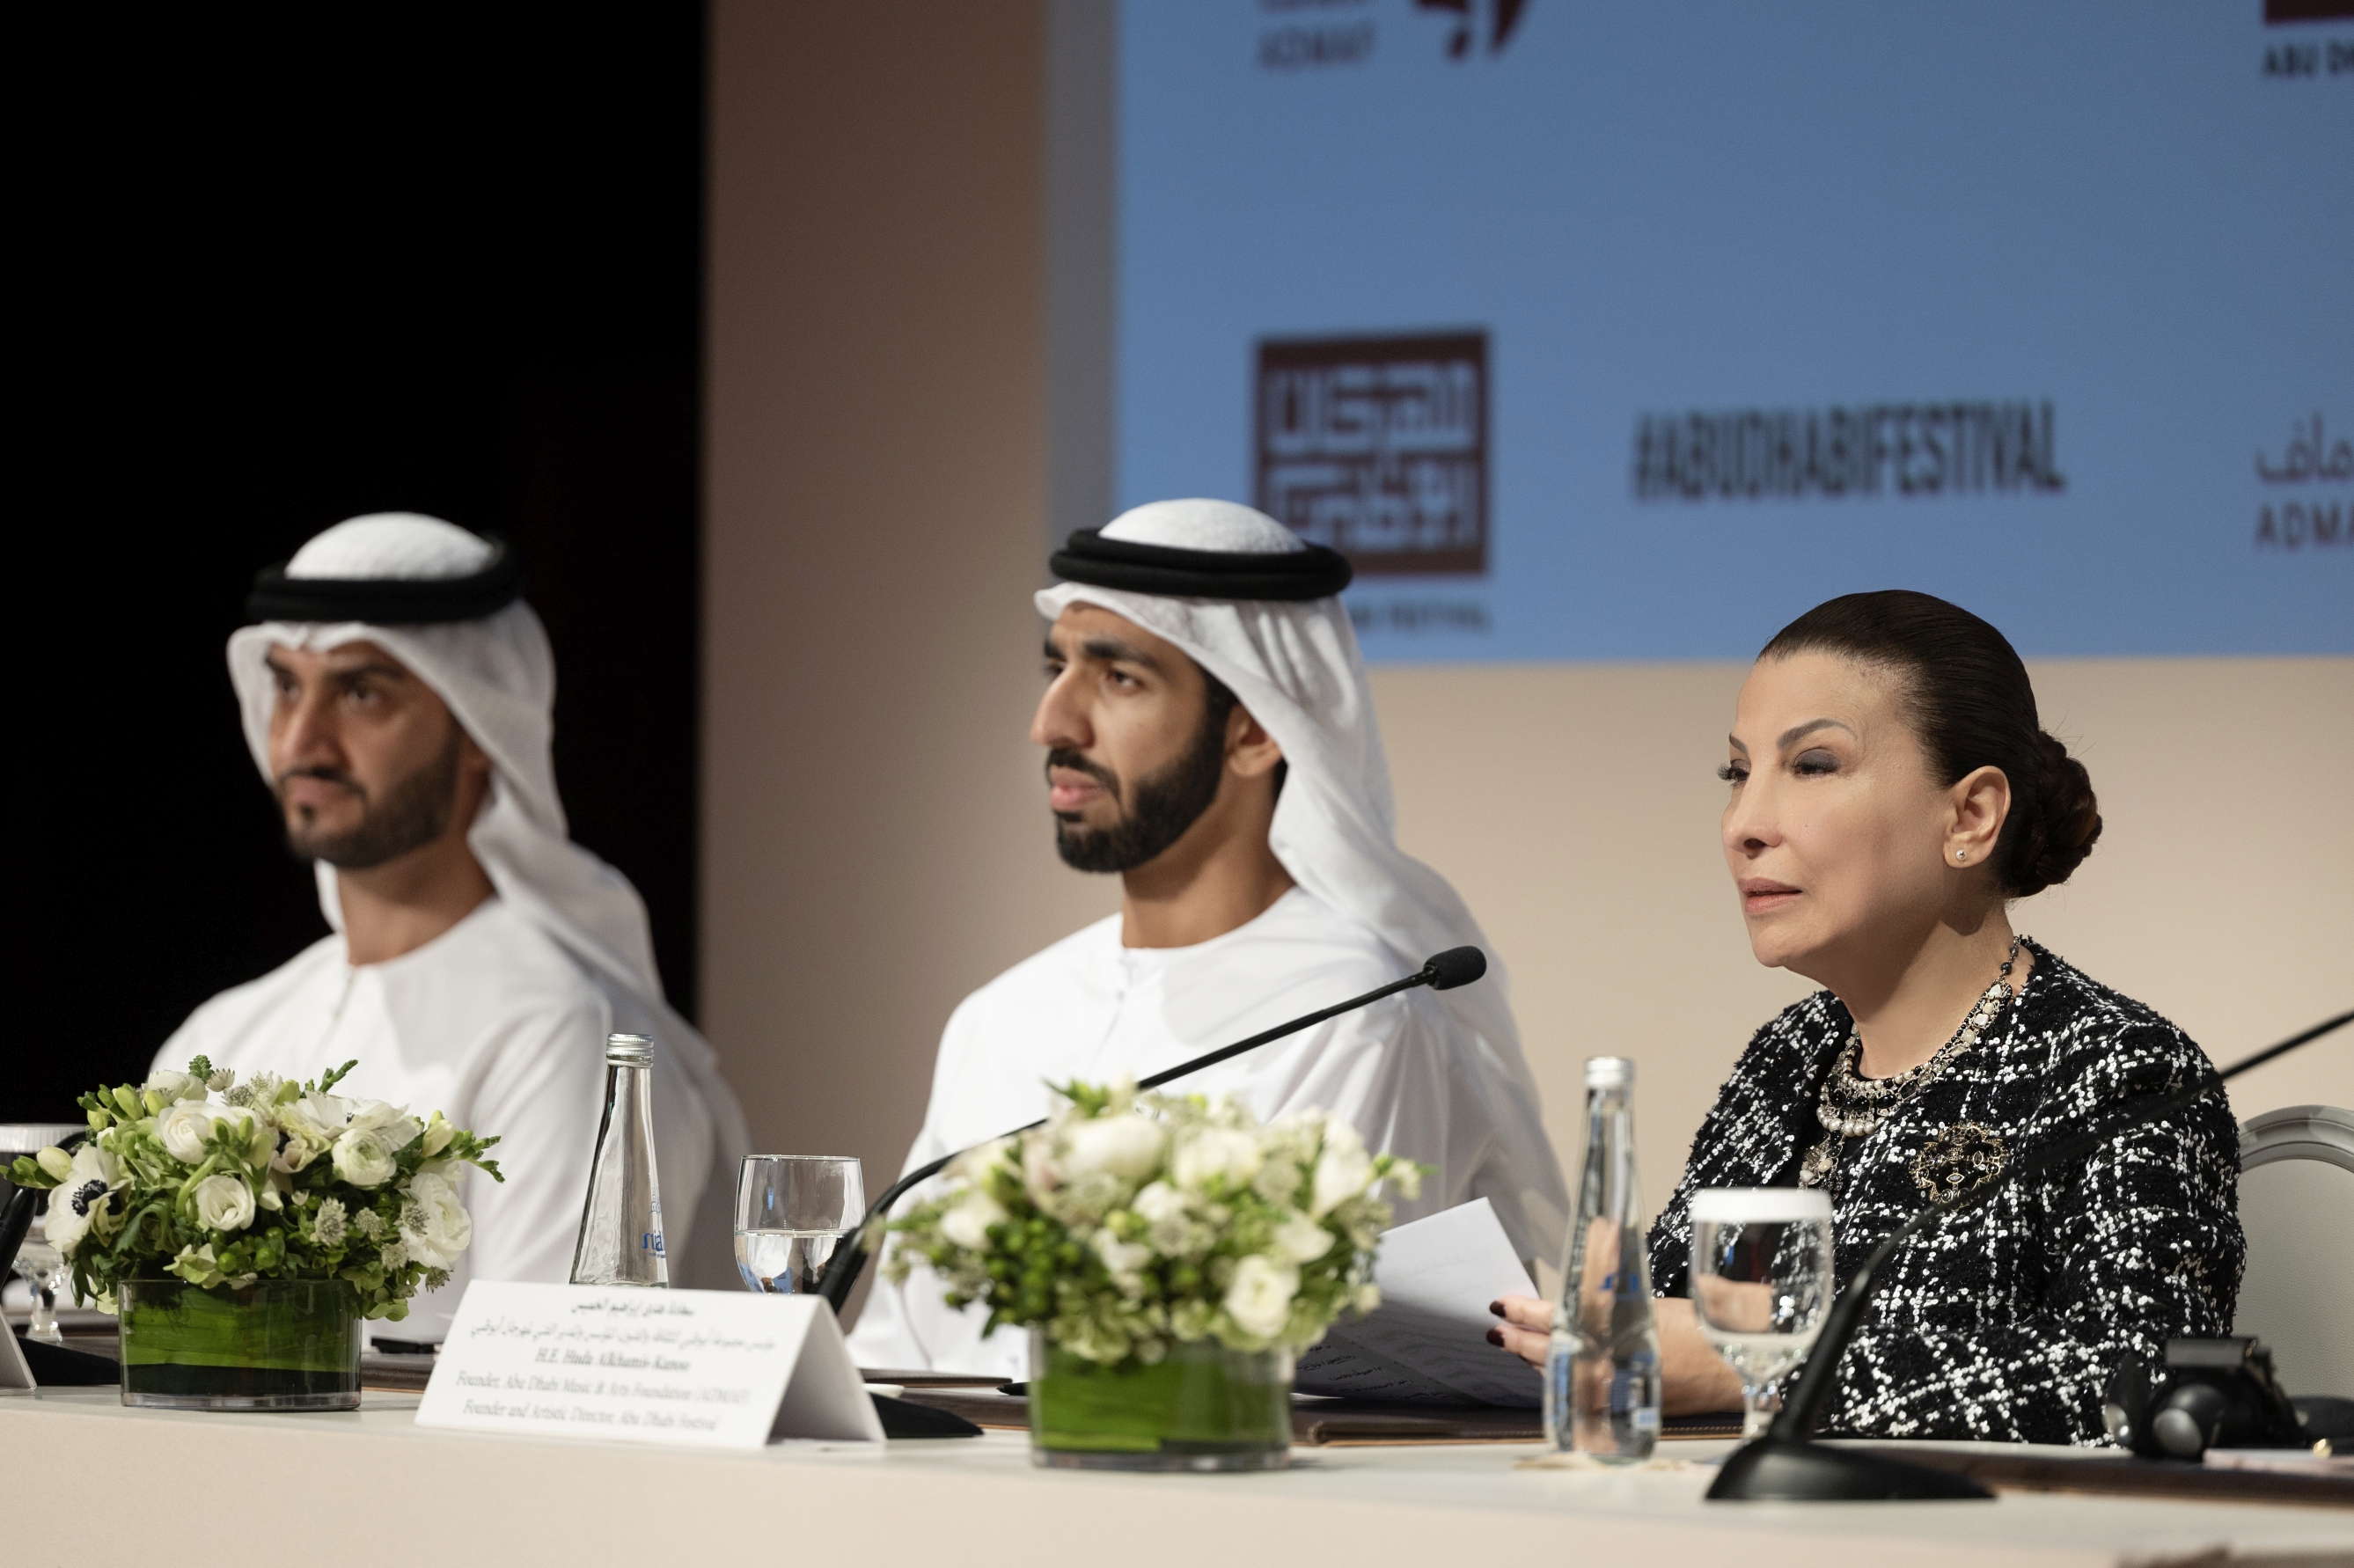 Abu Dhabi Festival Announcesline-up Of 20th Anniversary Edition Held Under The Theme ‘The Will For Evolution’